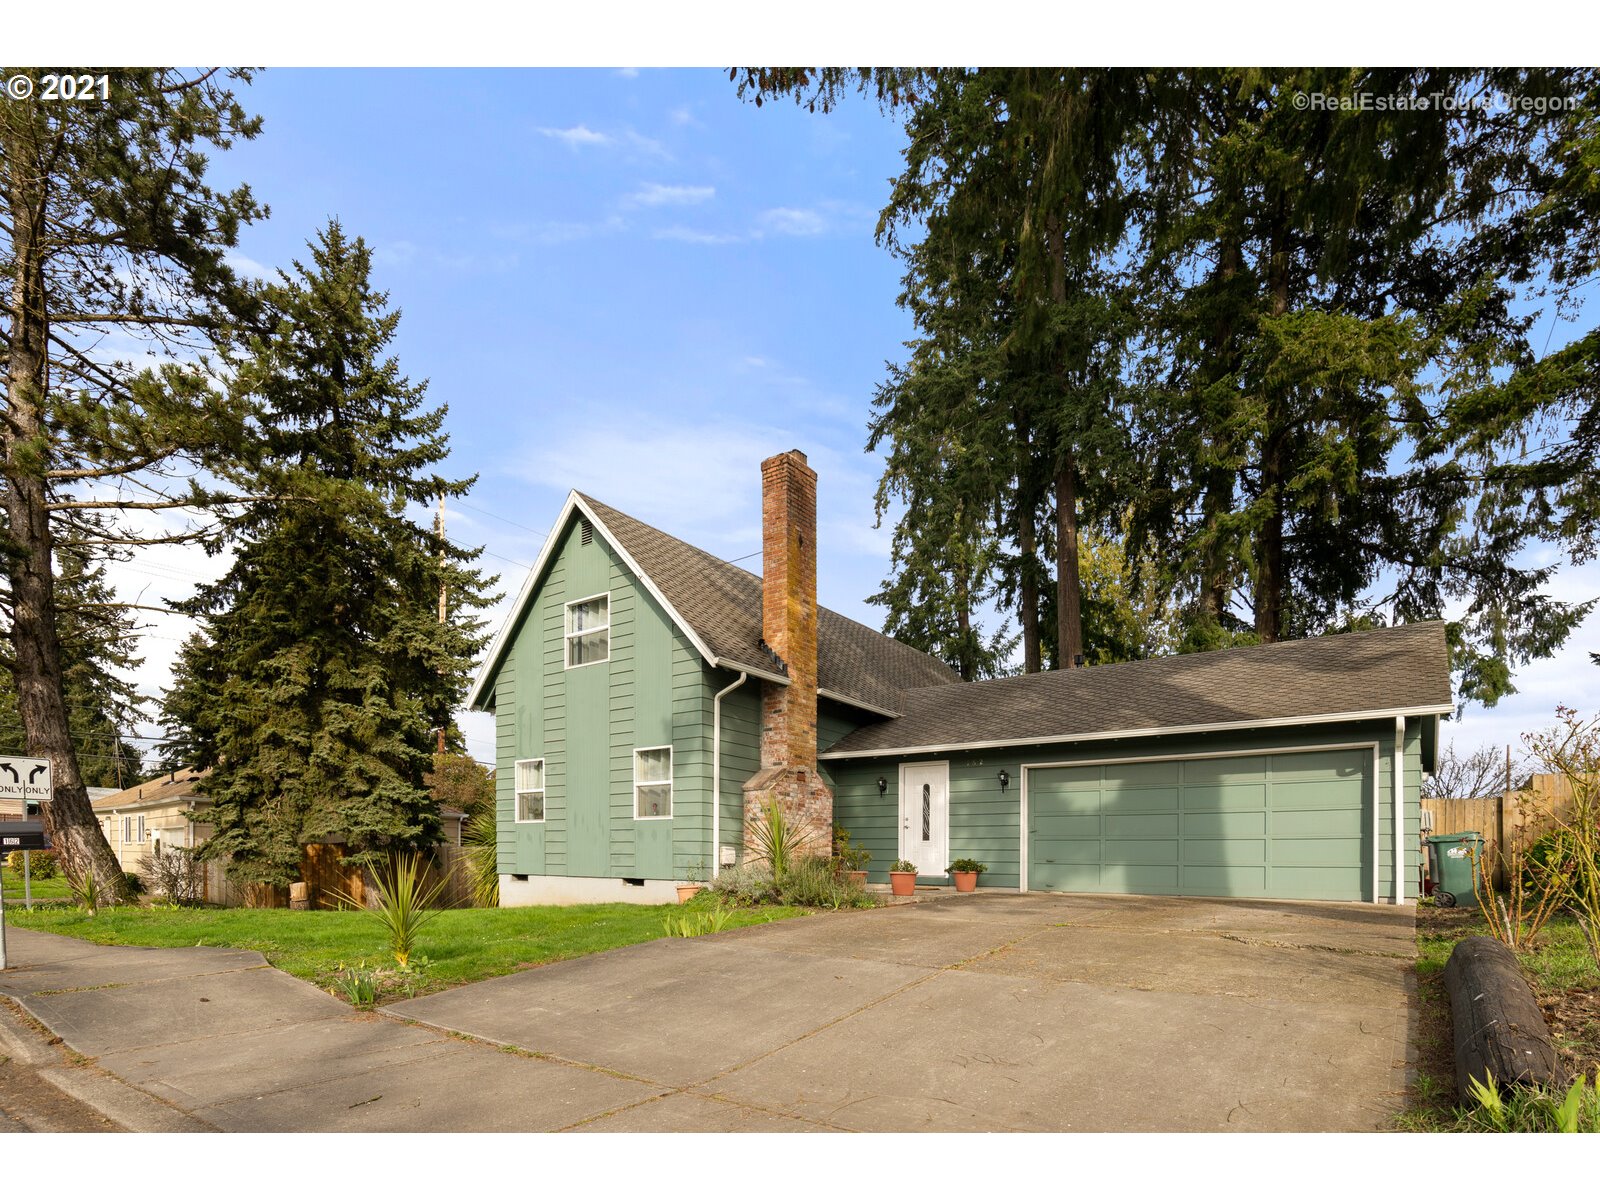 162 SE 24TH AVE (1 of 28)